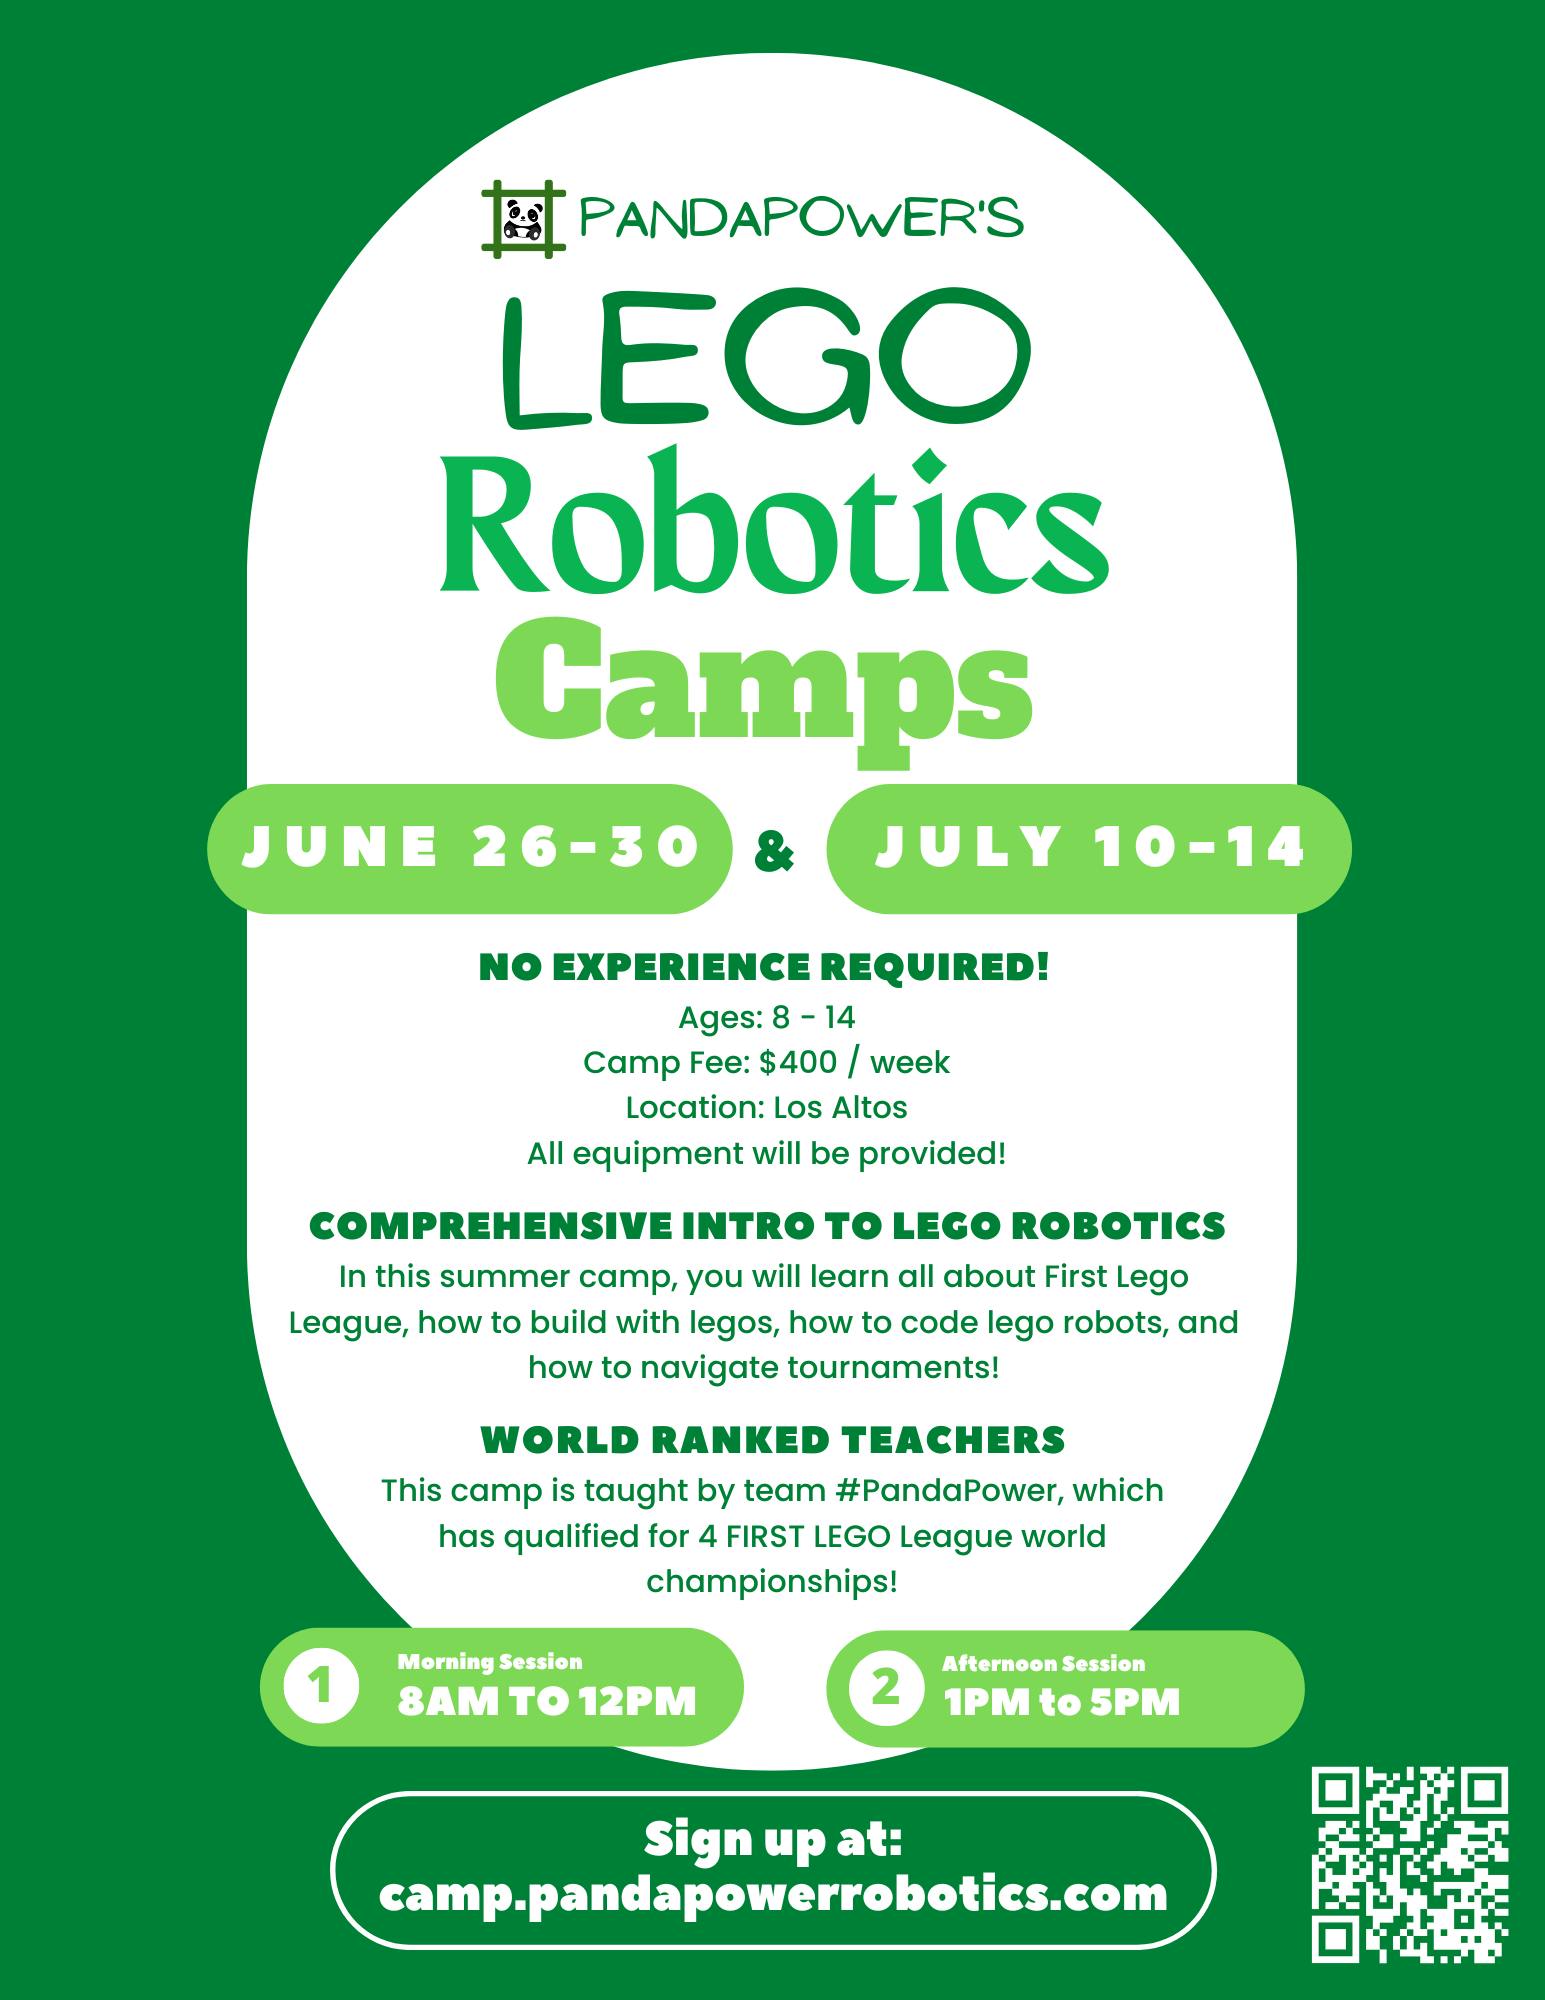 FLL Summer Camp Flyers (1).png